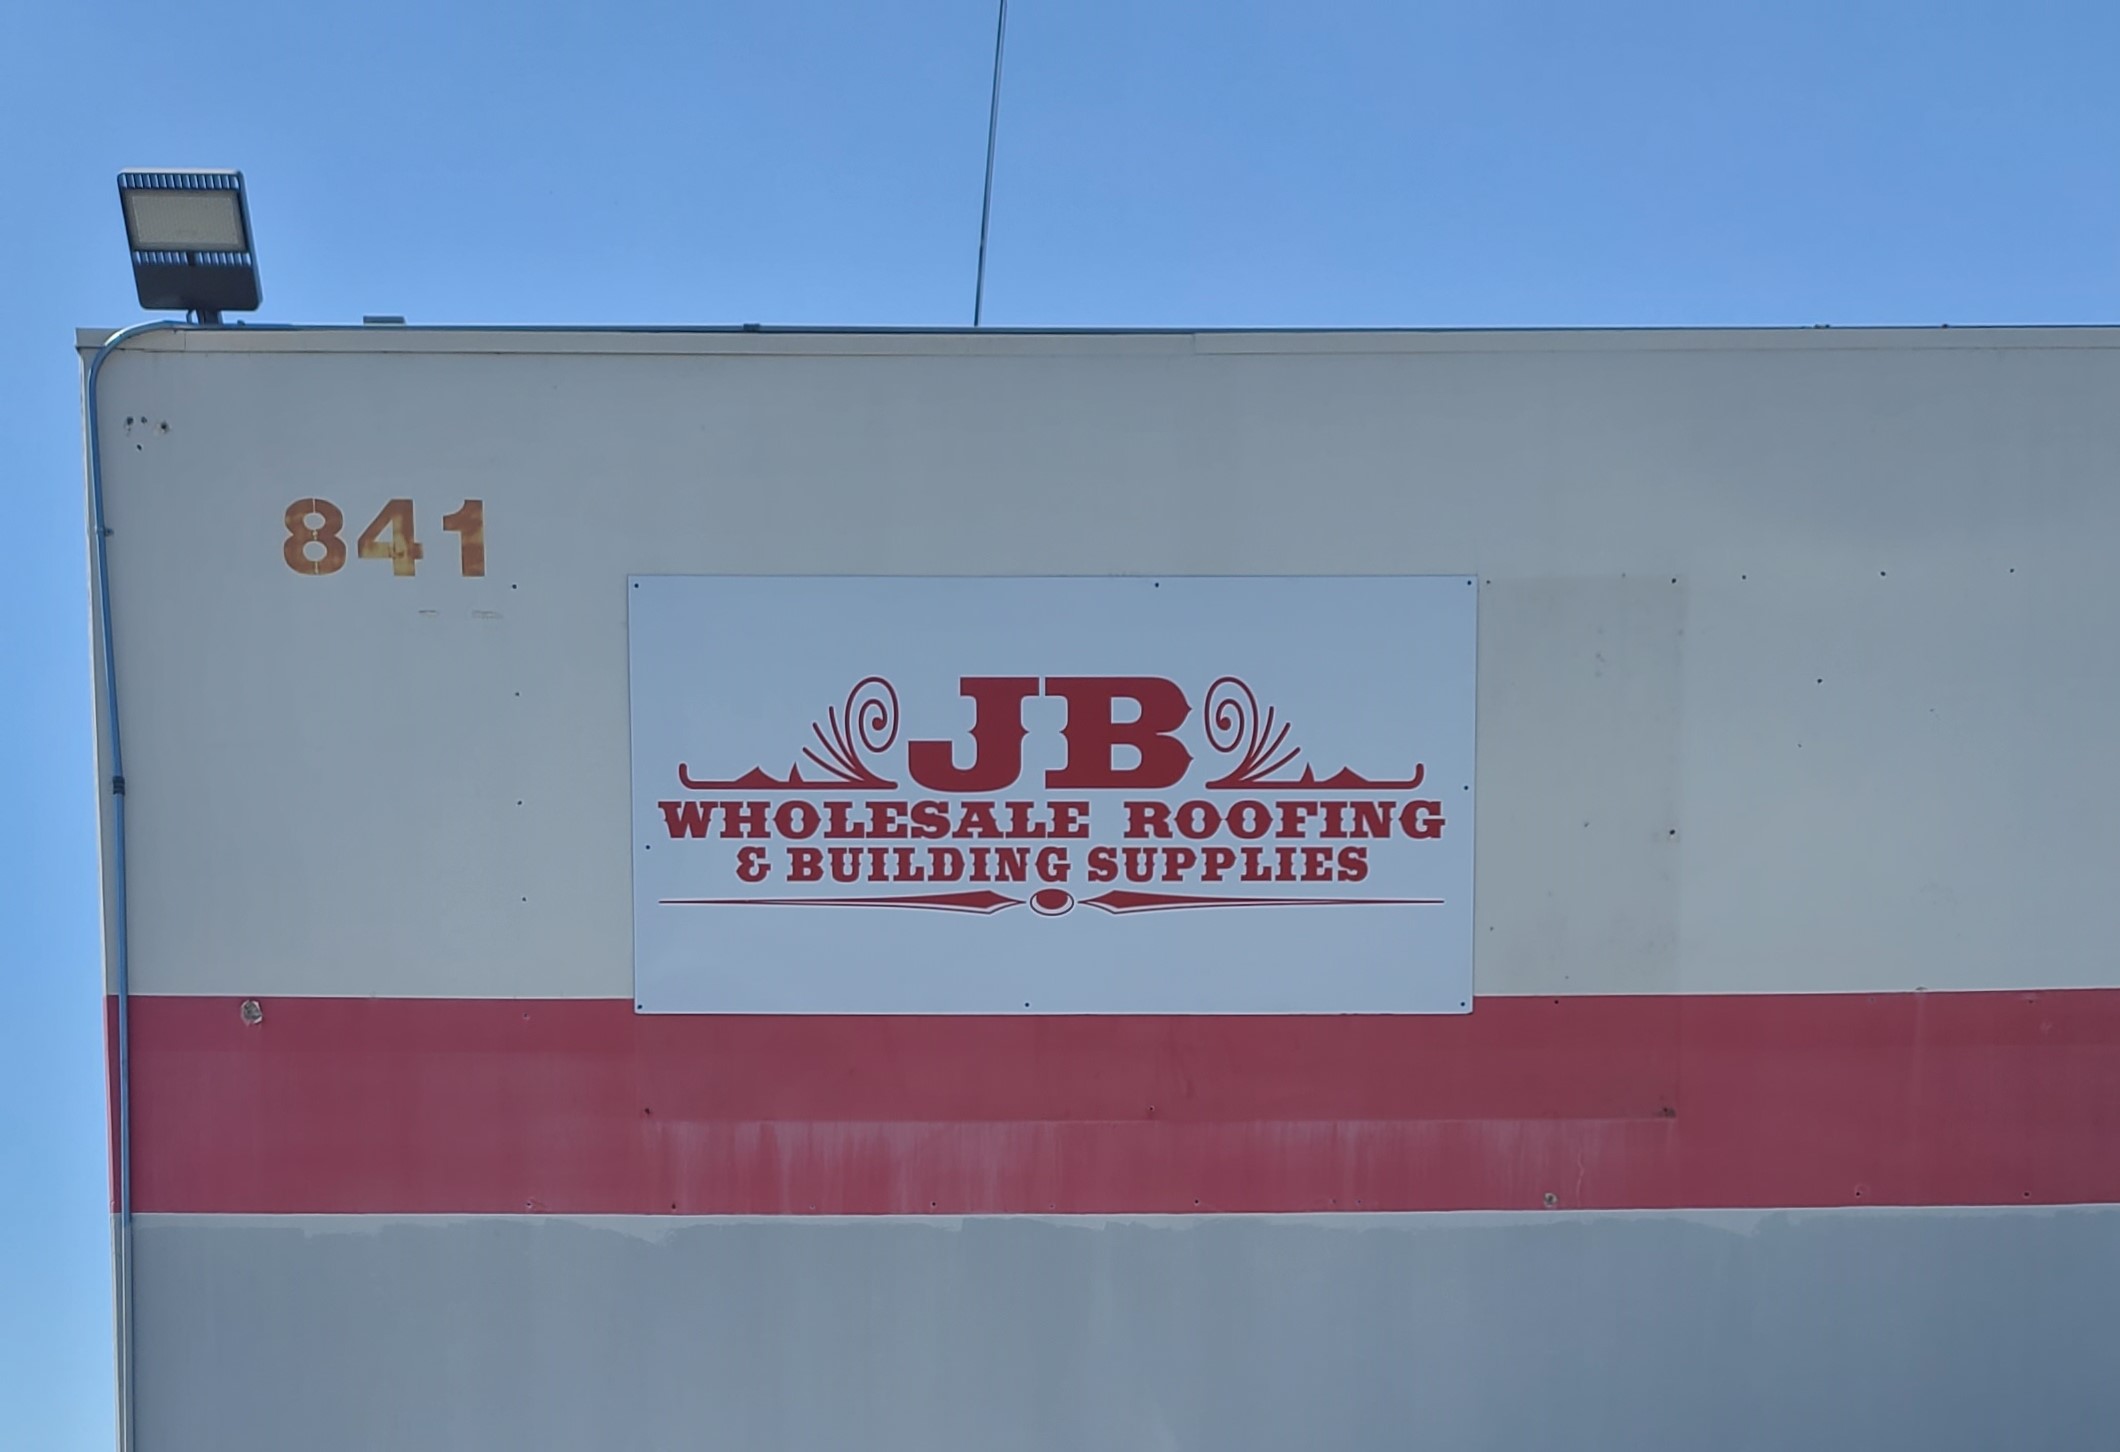 Our sign package for JB Wholesale includes more maxmetal outdoor signs for their Riverside branch. These include a building sign and directional pole signs.